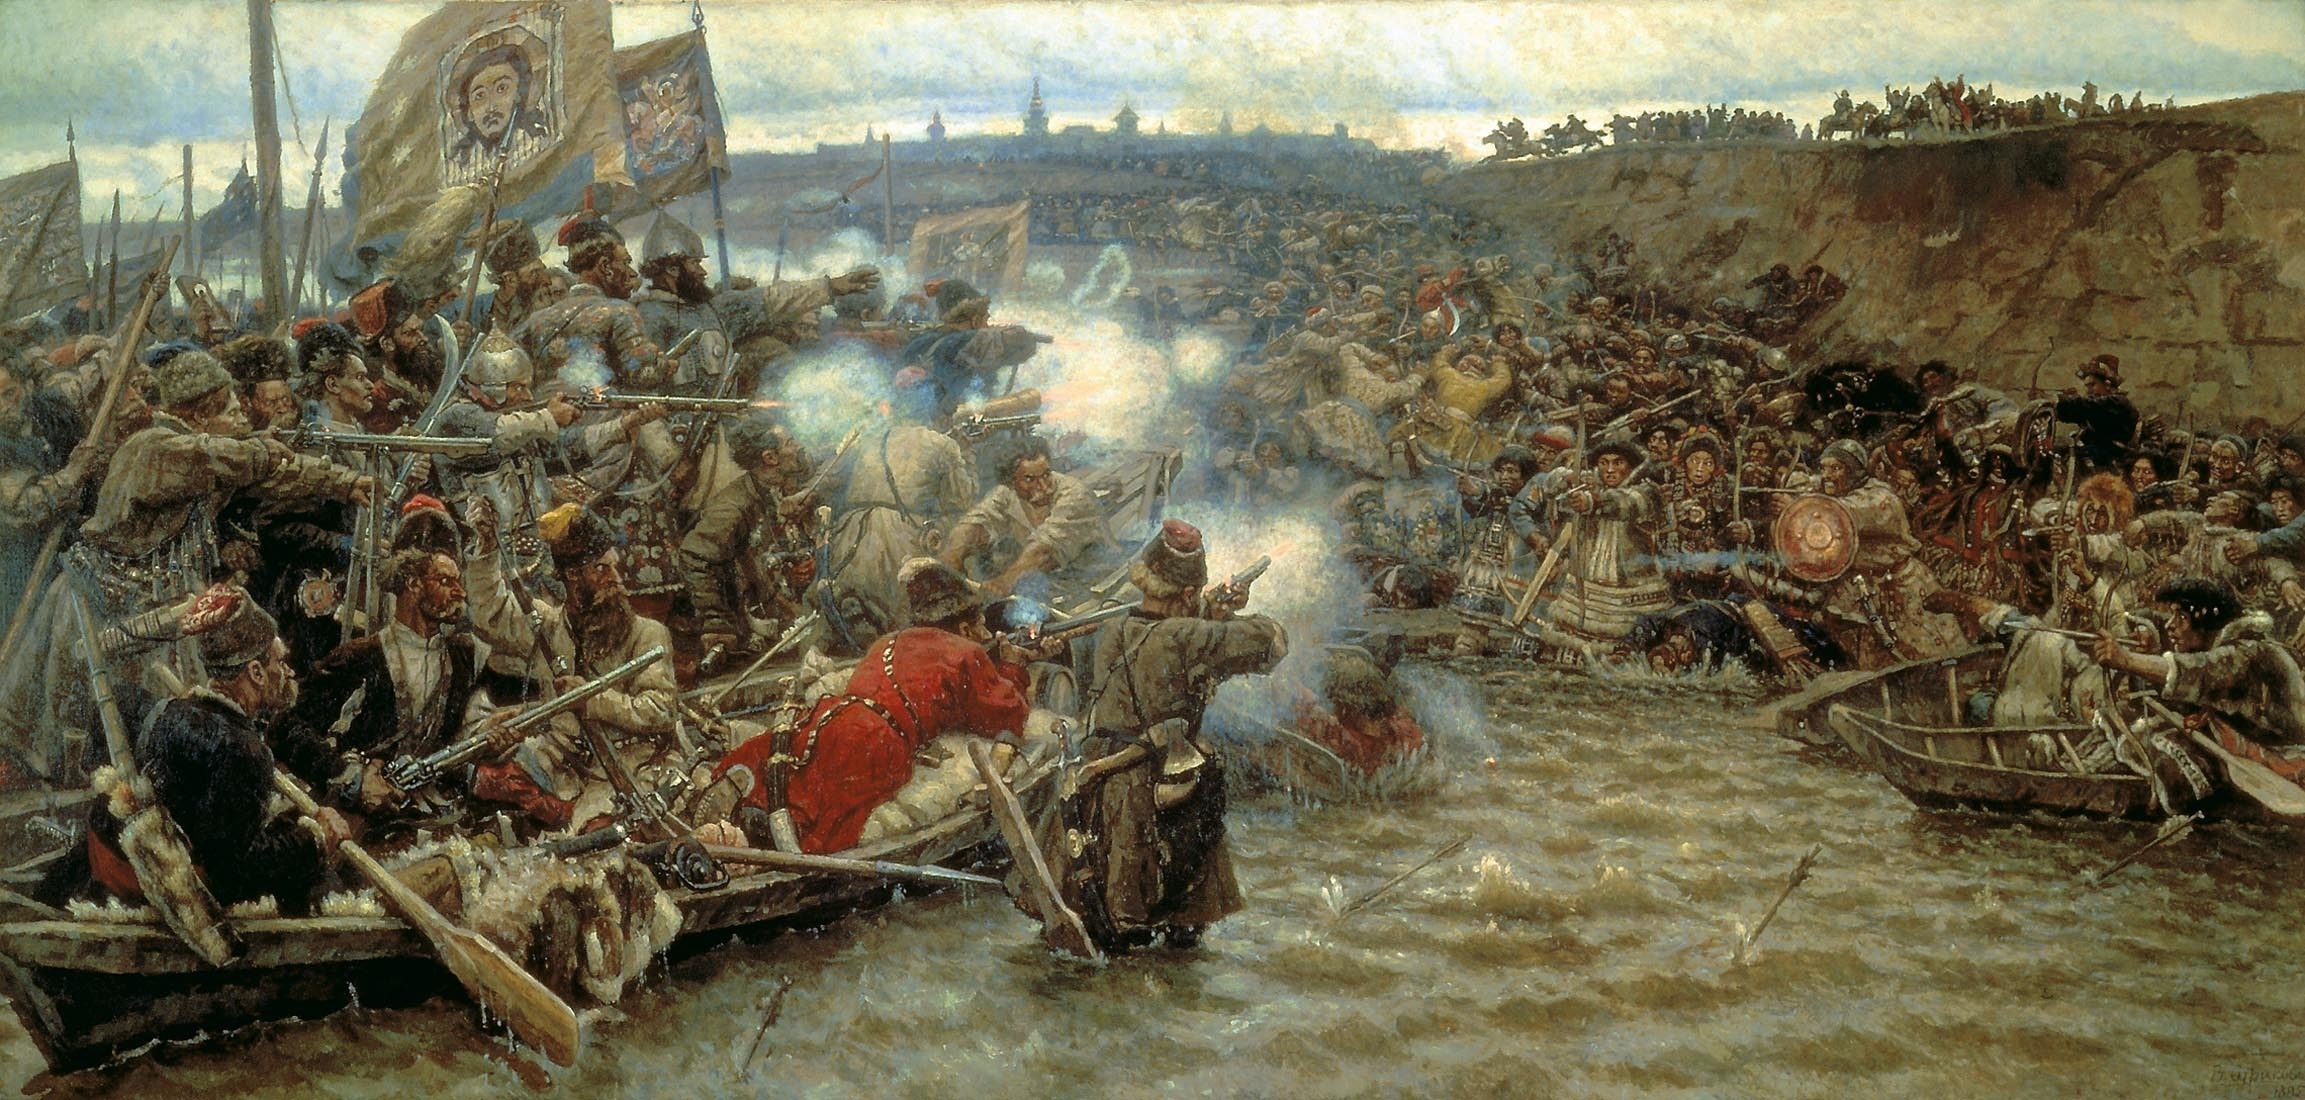 the, Conquest, Of, Siberia, By, Yermak, Surikov, History, Boat, River, Water, Guns, Smoke, Flags, Banners, Icons, Battle, Military Wallpaper